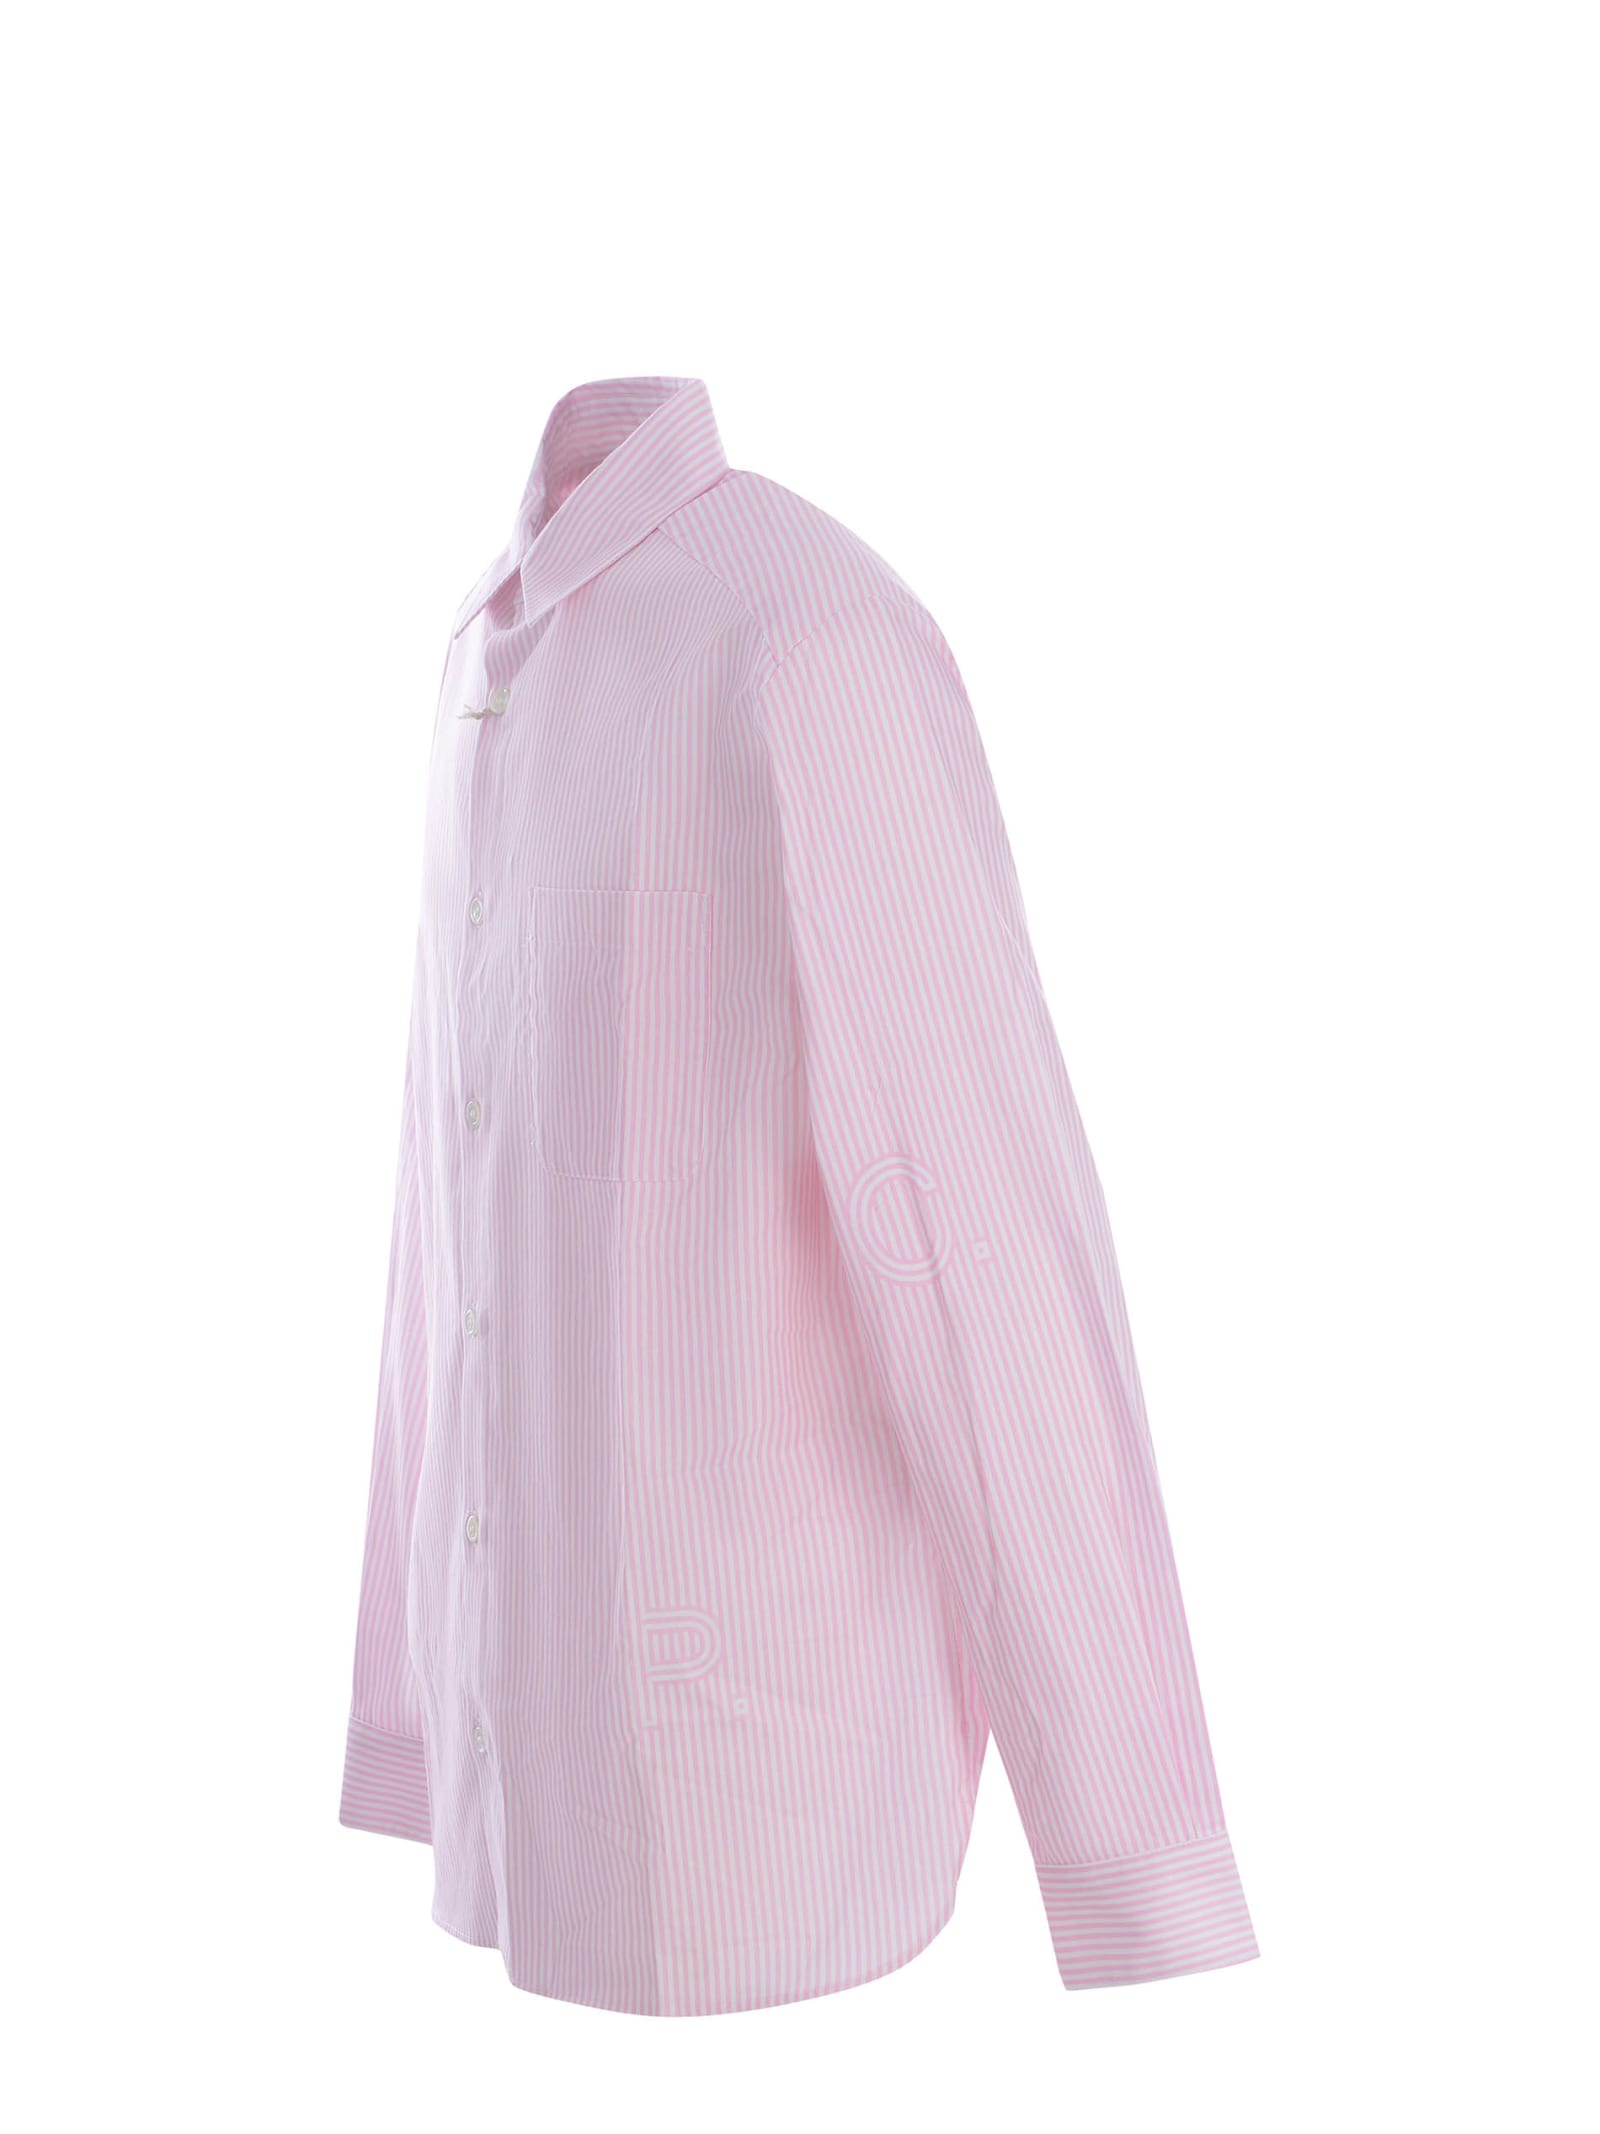 Shop Apc Shirt A.p.c. Malo Made Of Cotton In Rosa